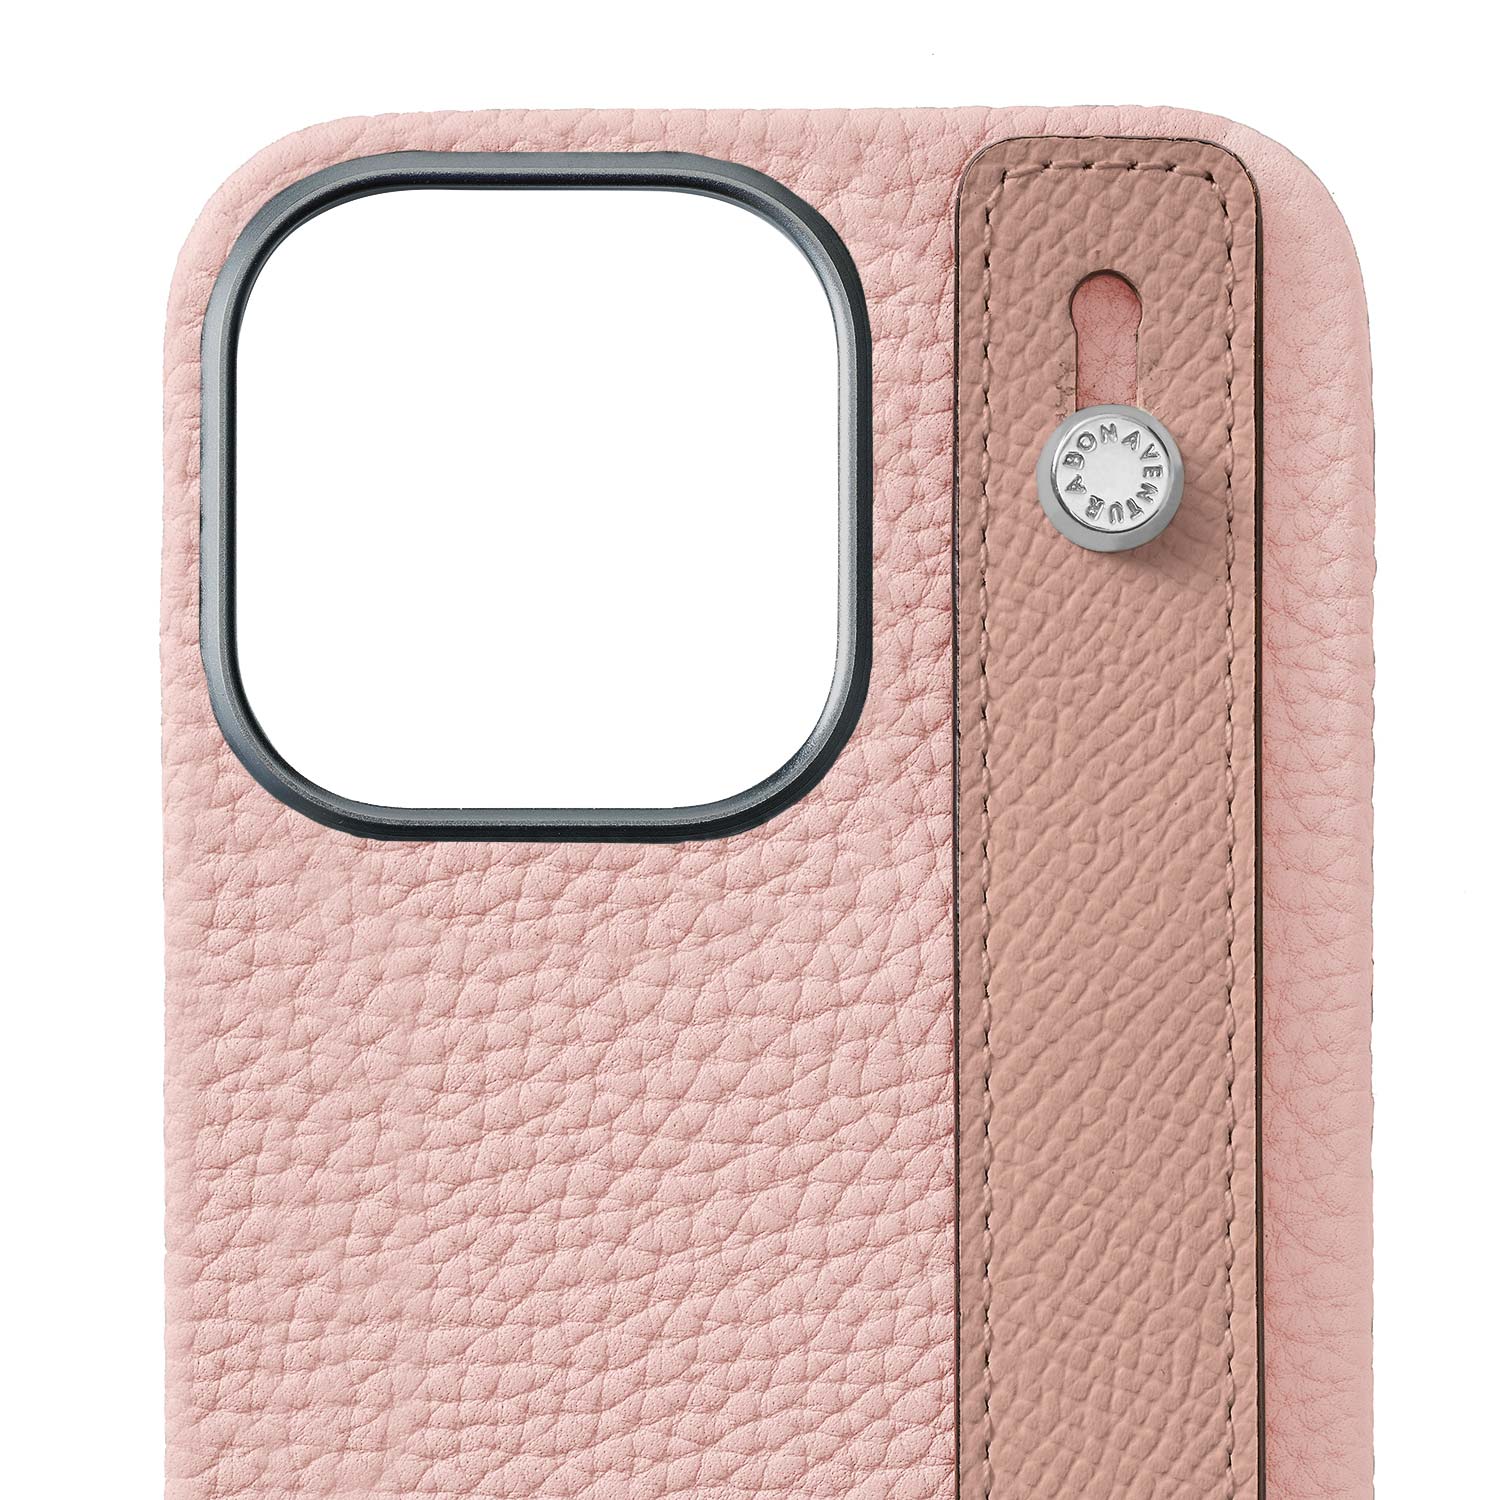 (iPhone 15 Pro Max) Back cover case with handle, shrink leather